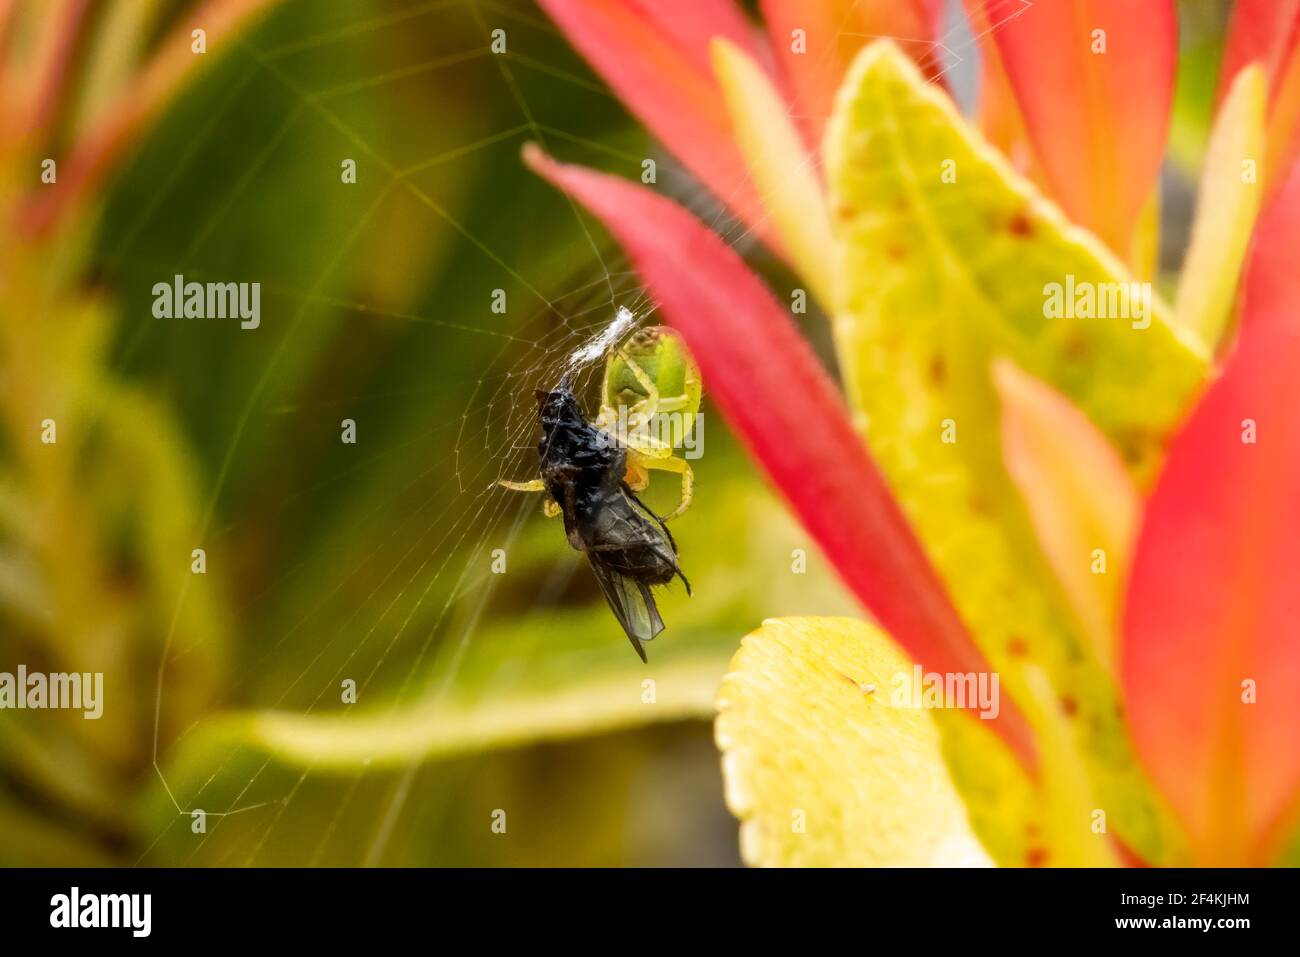 A young cucumber green spider (araniella cucurbitina) in spring which is a common garden green orb spider which catches its fly insect prey by buildin Stock Photo